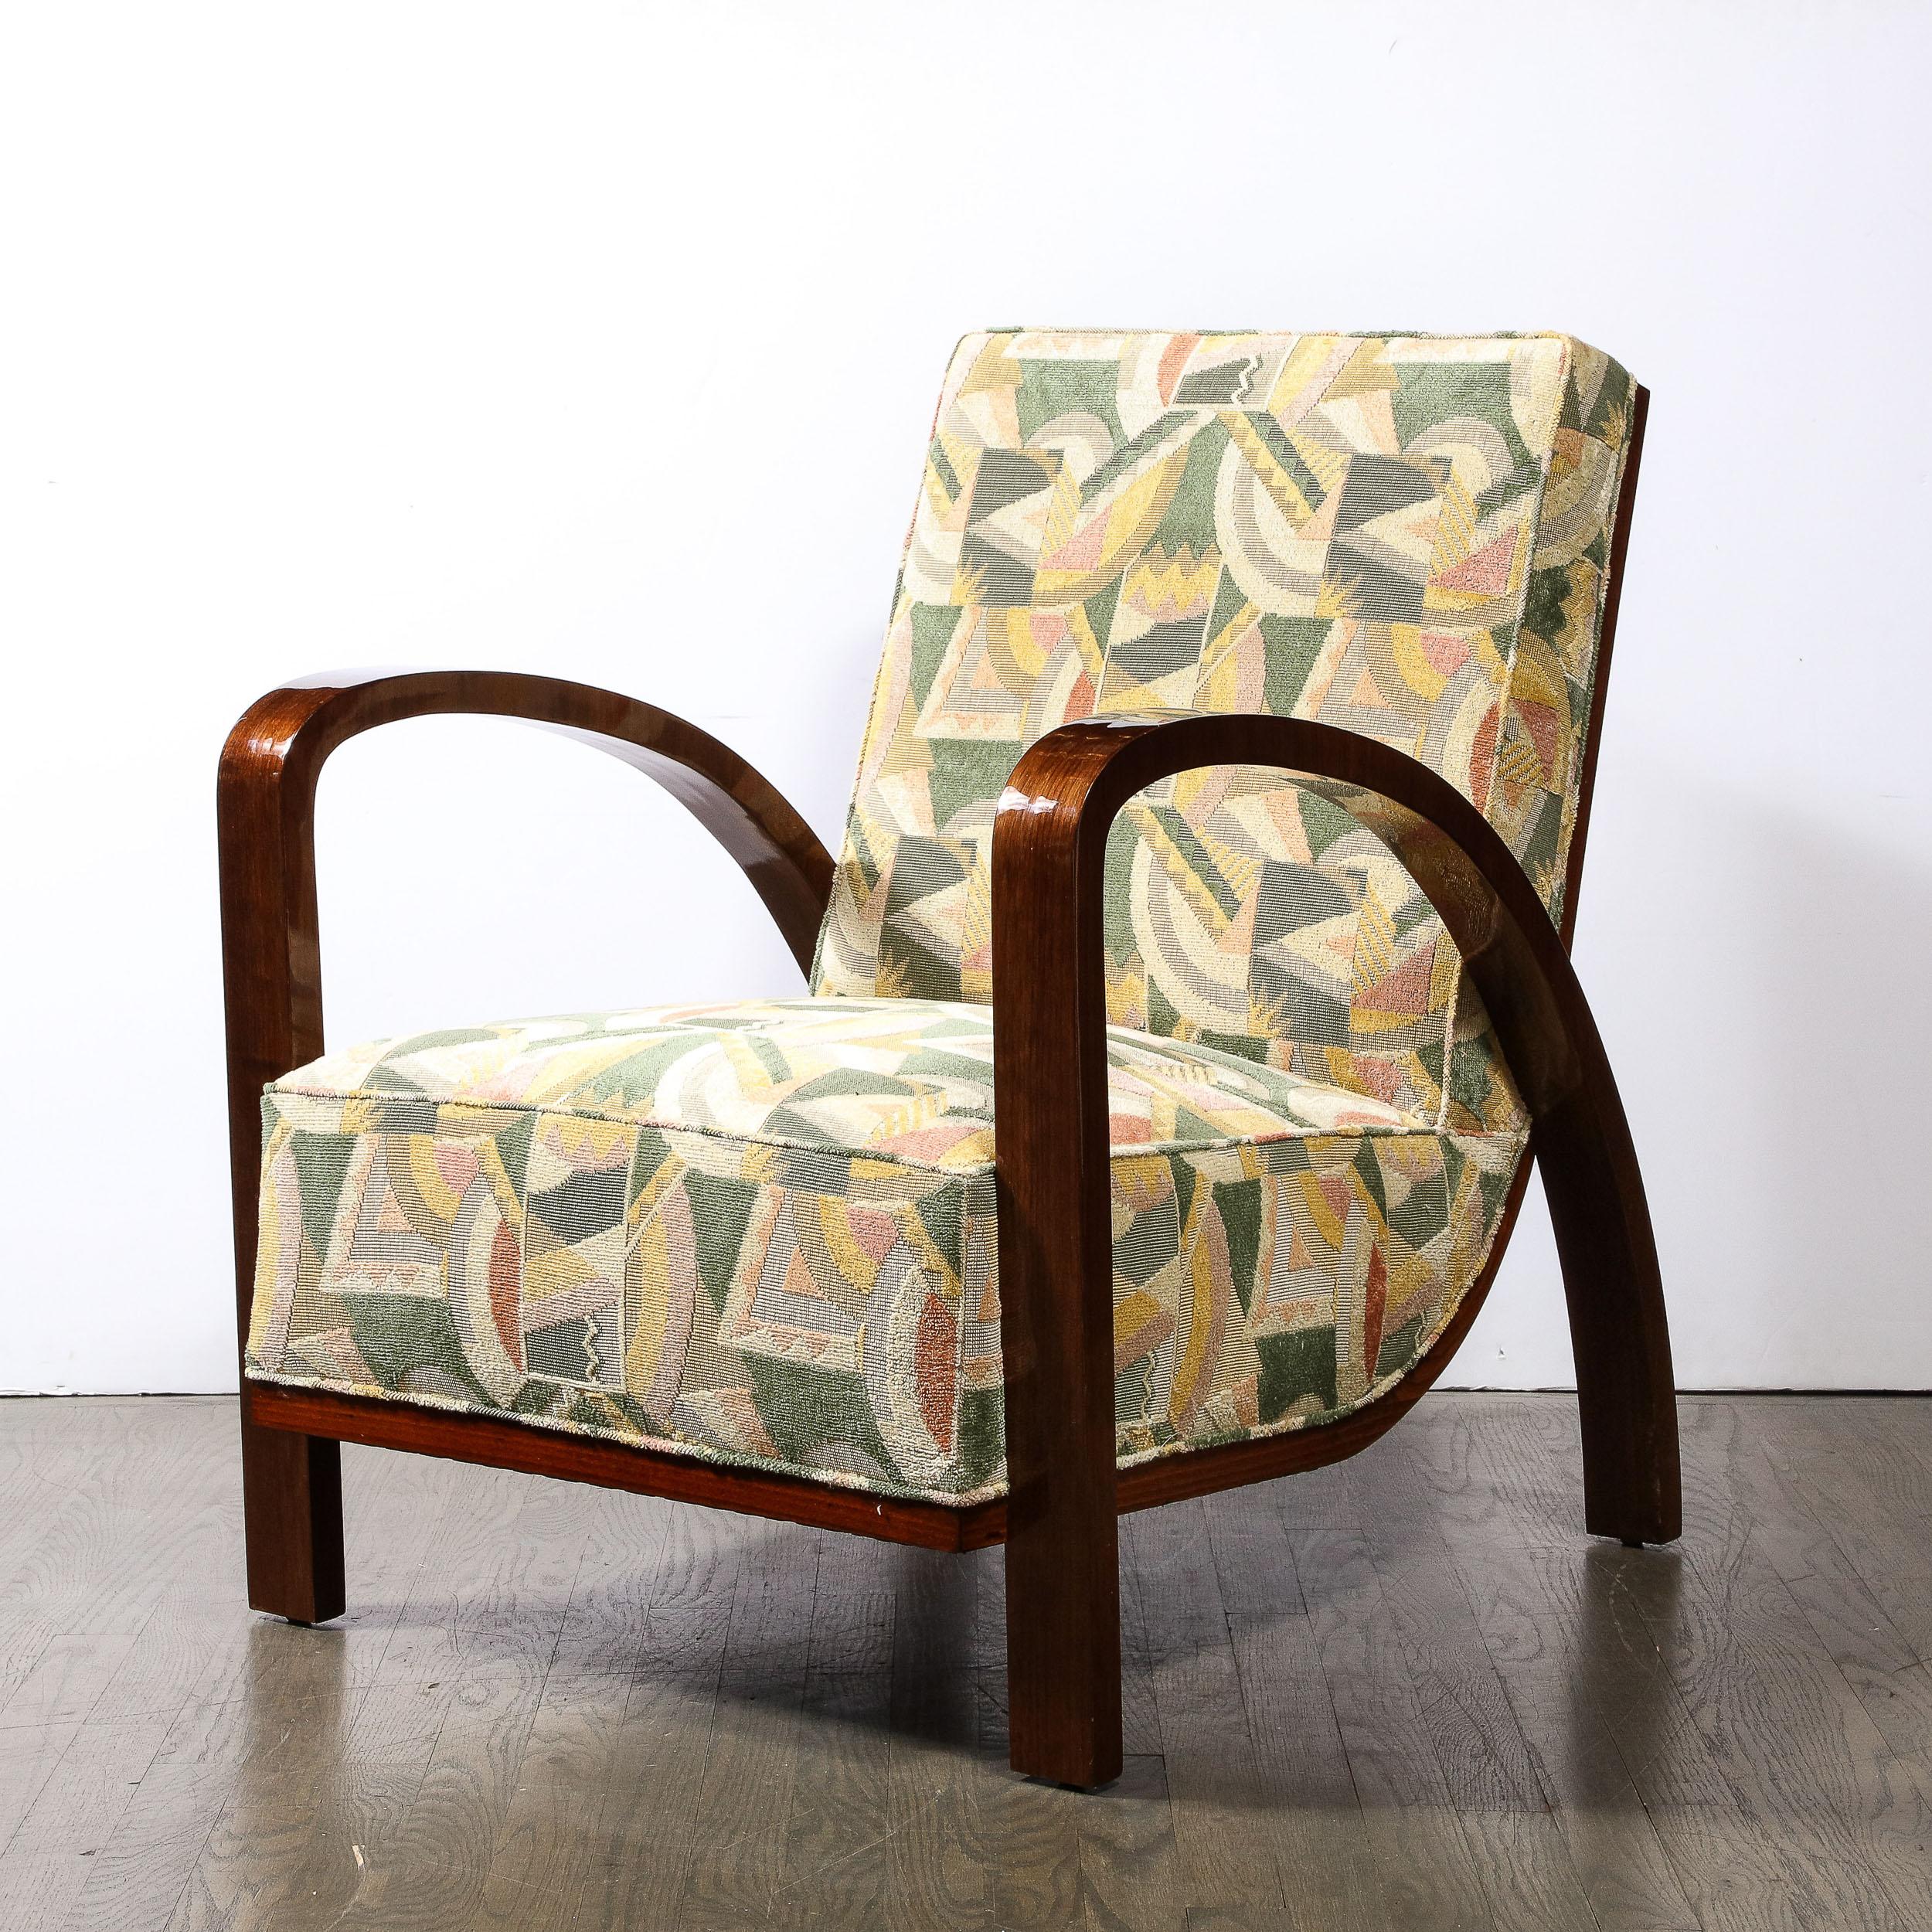 Pair of Art Deco Halabala Arm Chairs in Walnut & Rare Clarence House Fabric In Excellent Condition For Sale In New York, NY